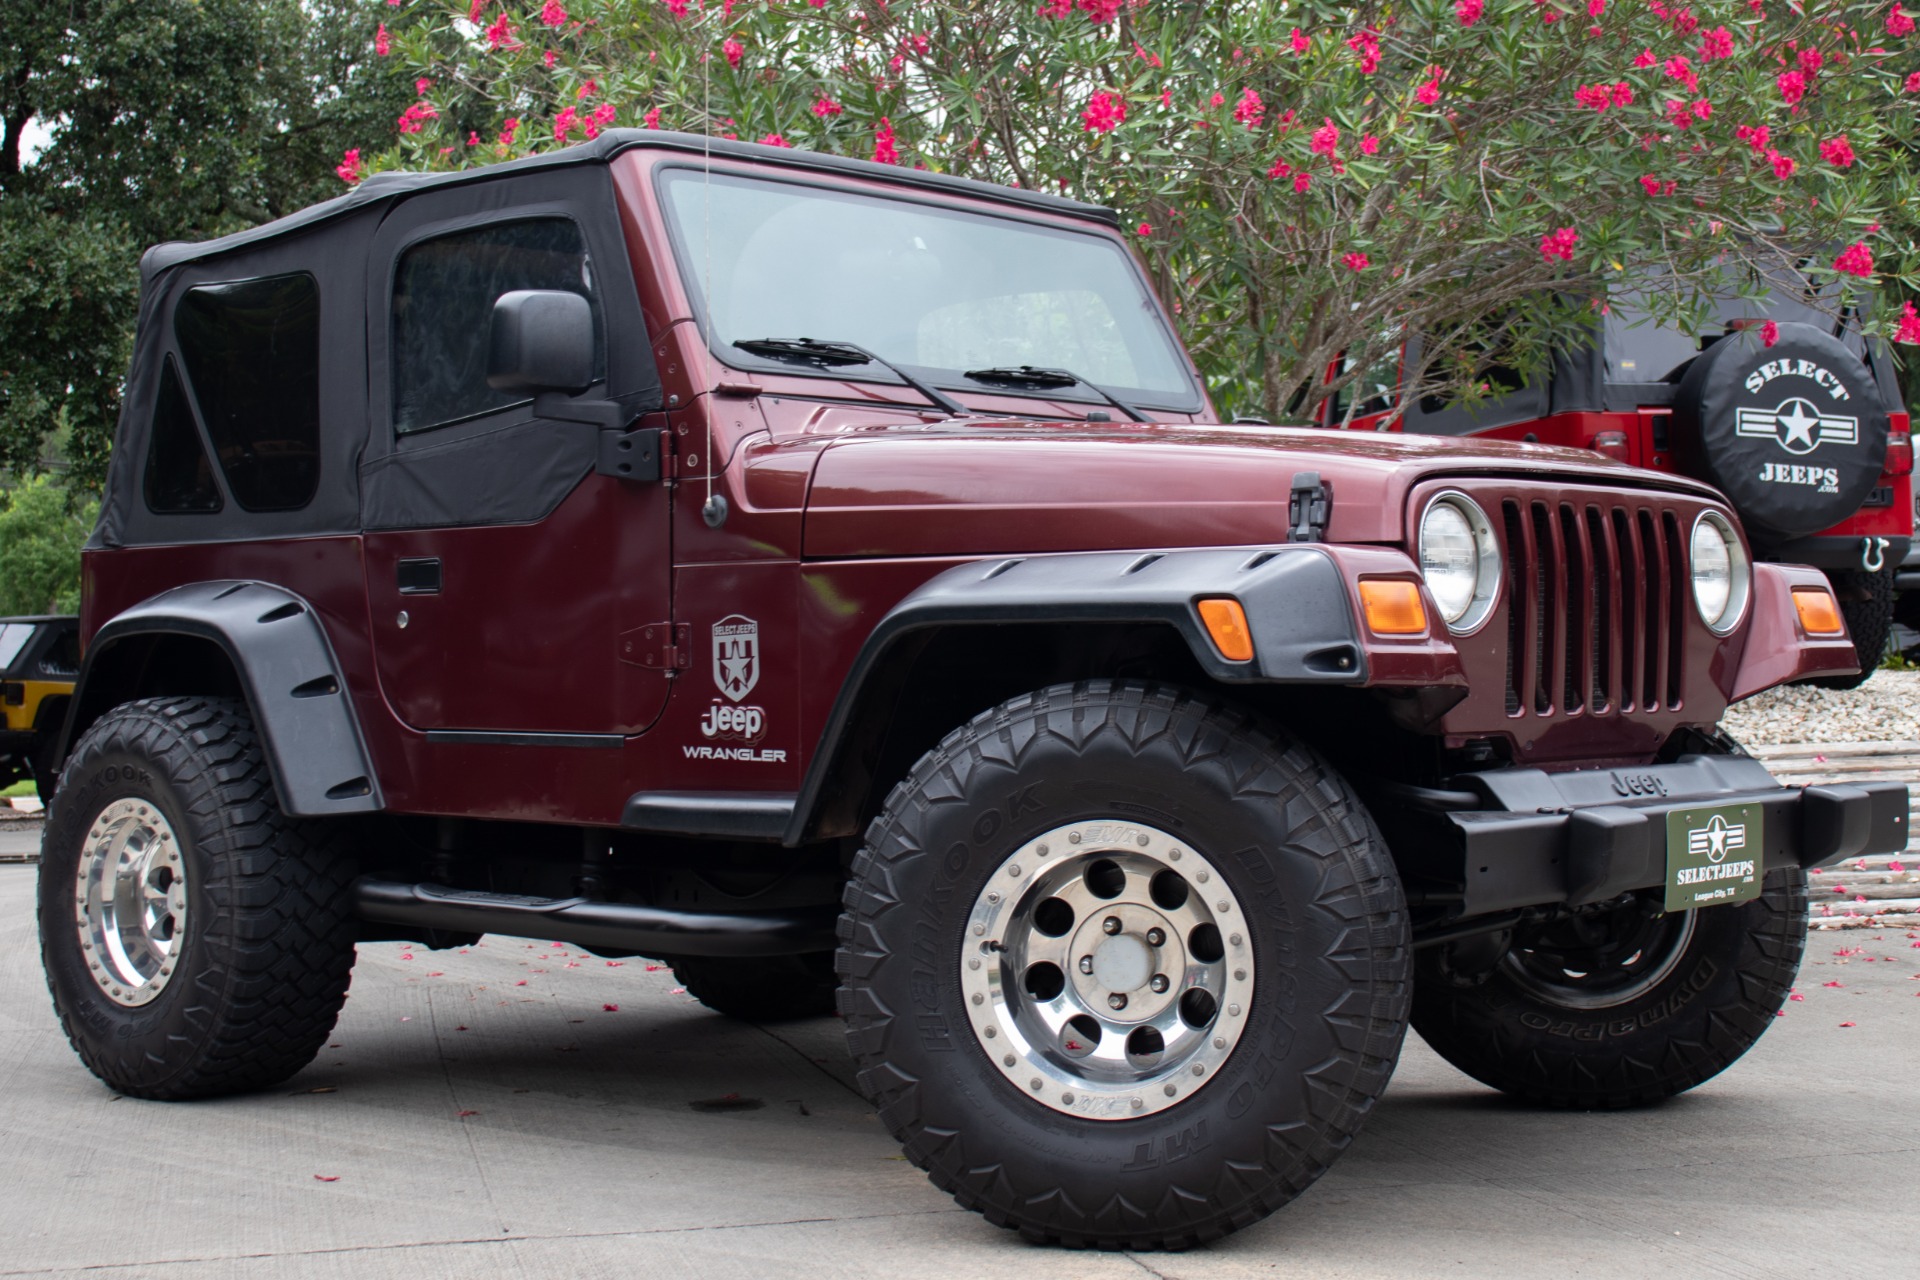 Used 2004 Jeep Wrangler SE For Sale ($12,995) | Select Jeeps Inc. Stock  #729526